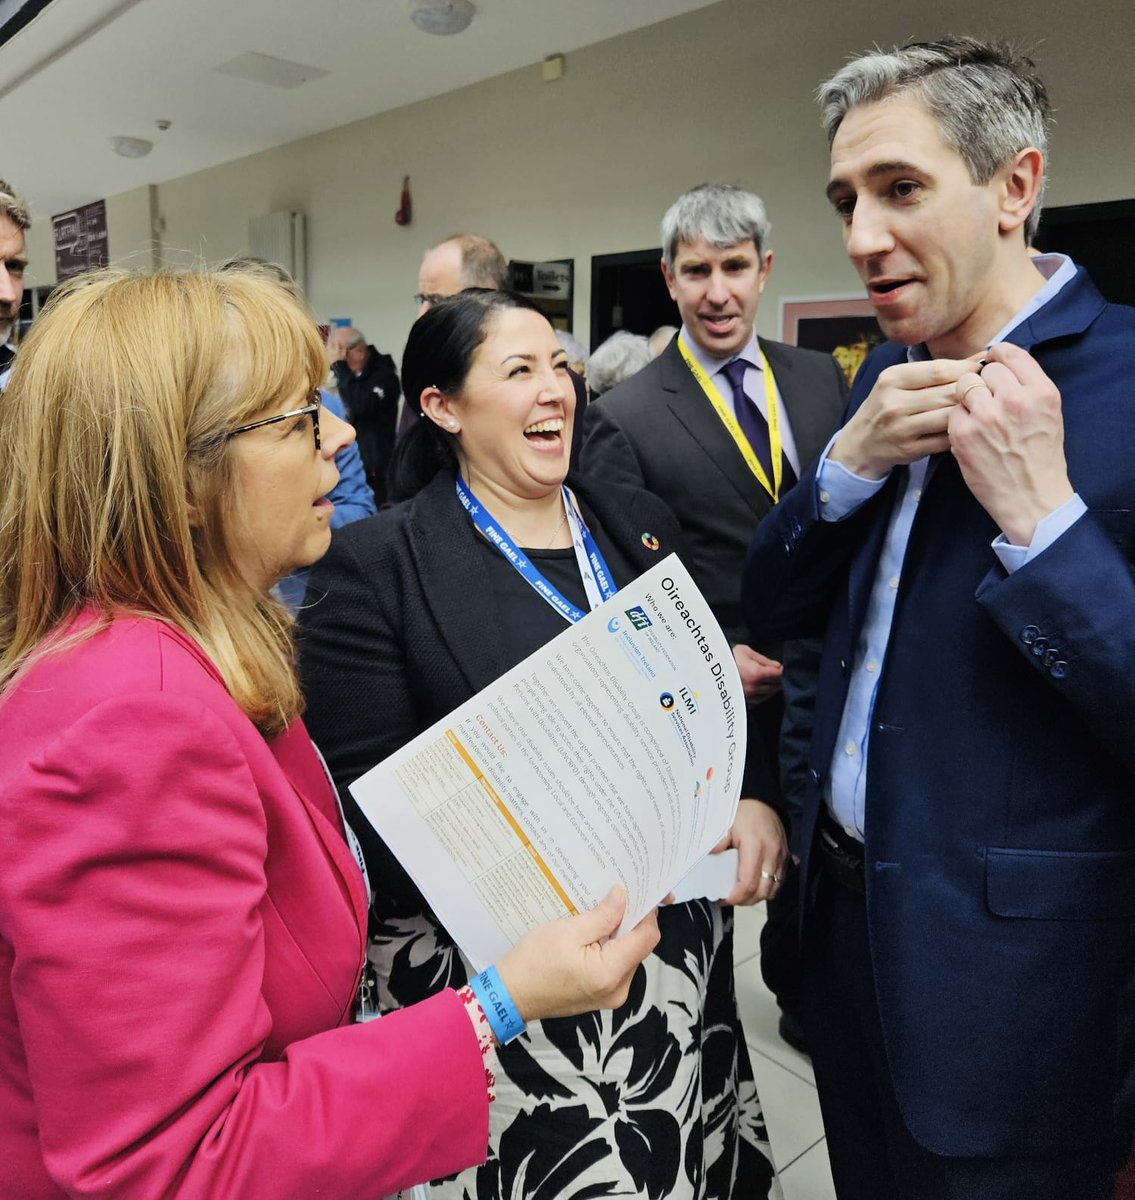 NLN’s Head of Advocacy, Emer Costello, speaks with incoming Taoiseach @SimonHarrisTD about the impactful work of NLN, the power of supported education, and sets forth the voices of students attending our training courses. #ThinkPossible #FGAF24 #SupportedTraining